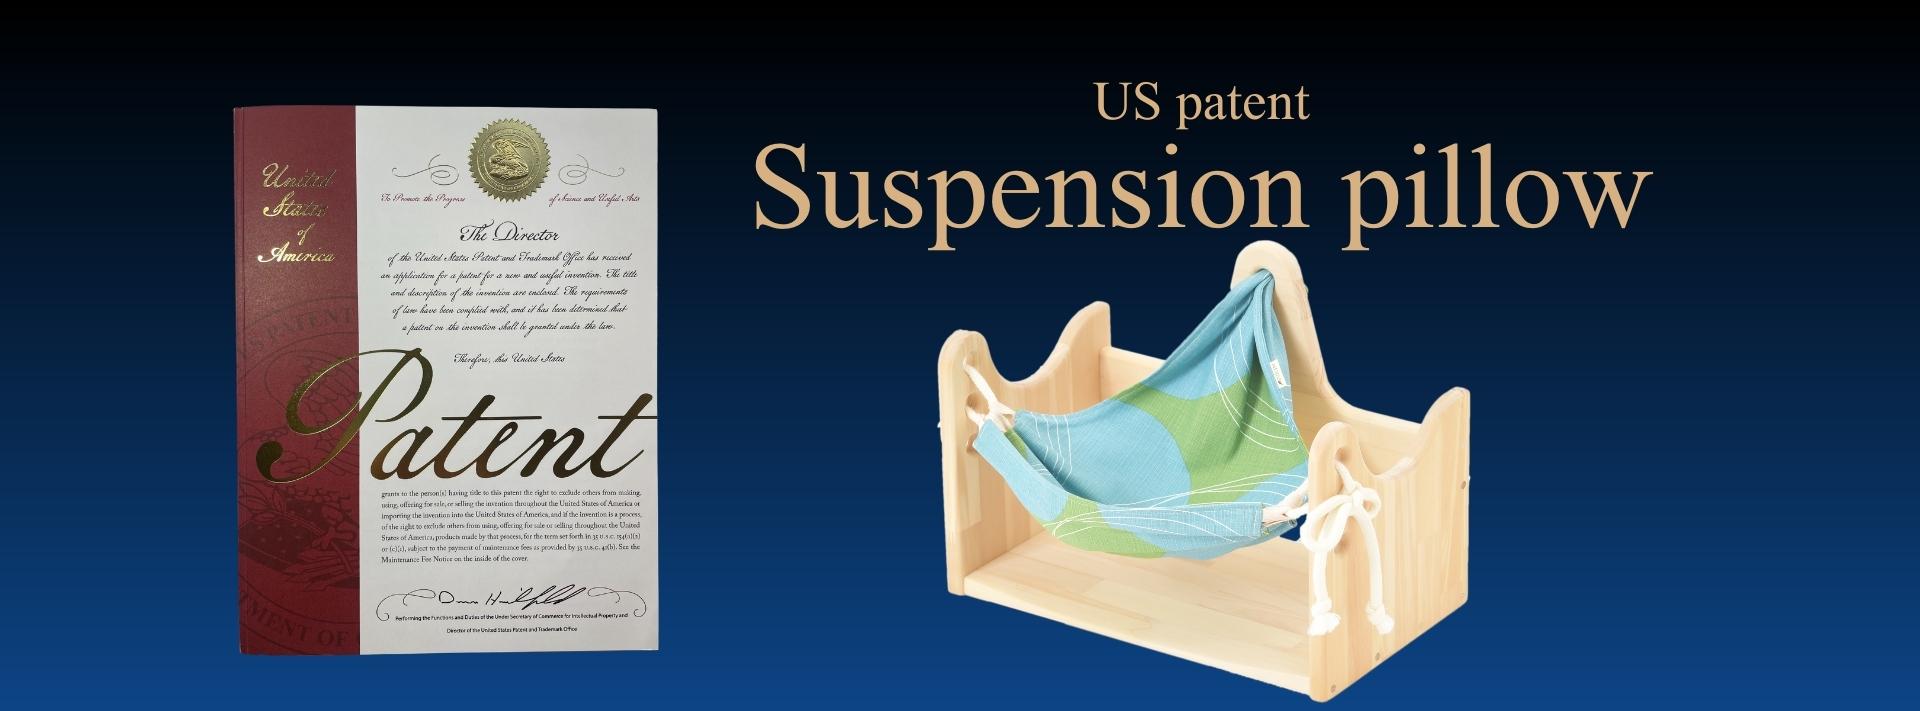 Suspension pillow was patented in US.